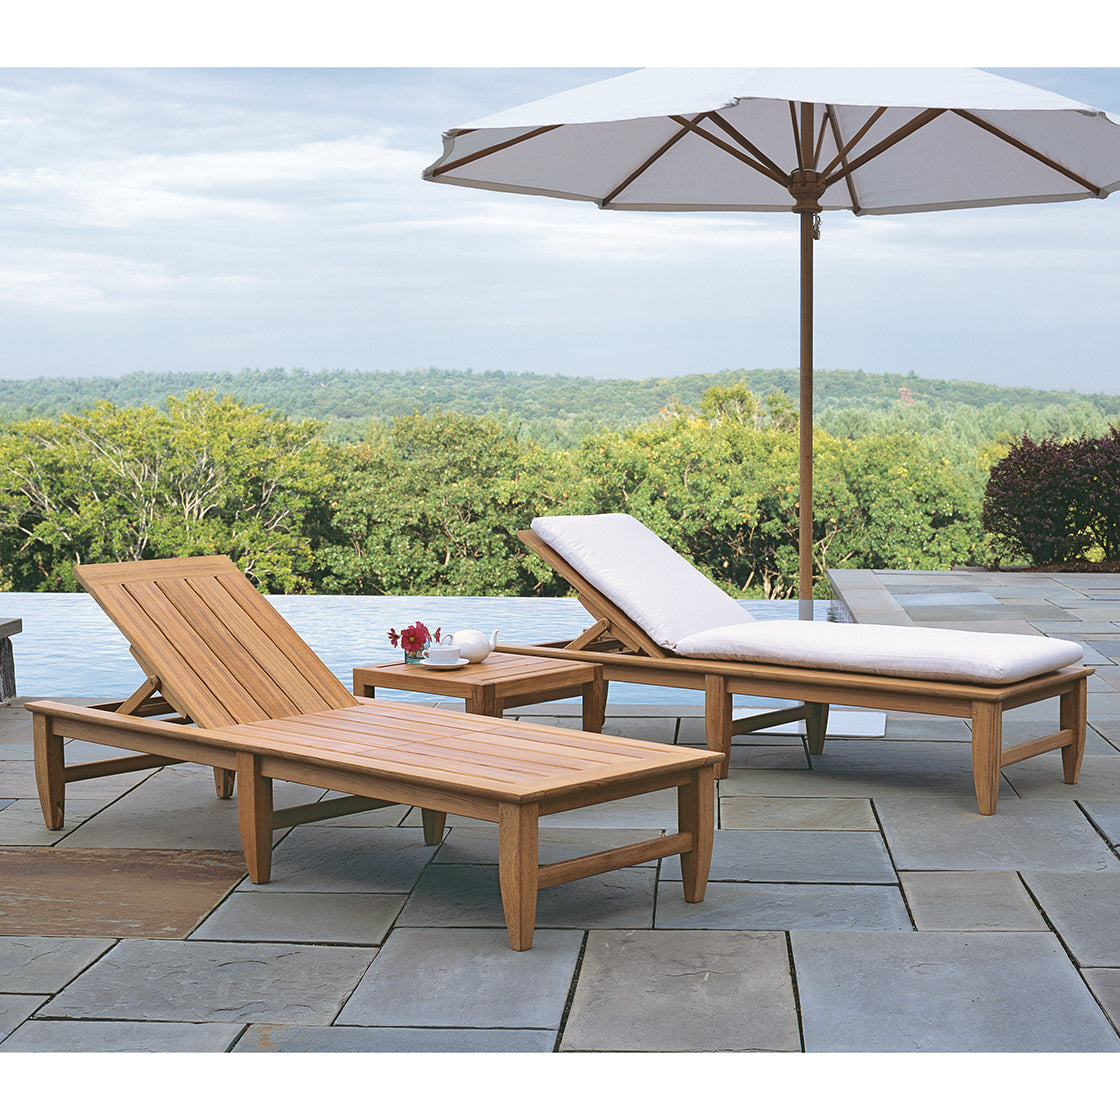 Chaise | Kingsley Bate Amalfi Collection | Valley Ridge Furniture